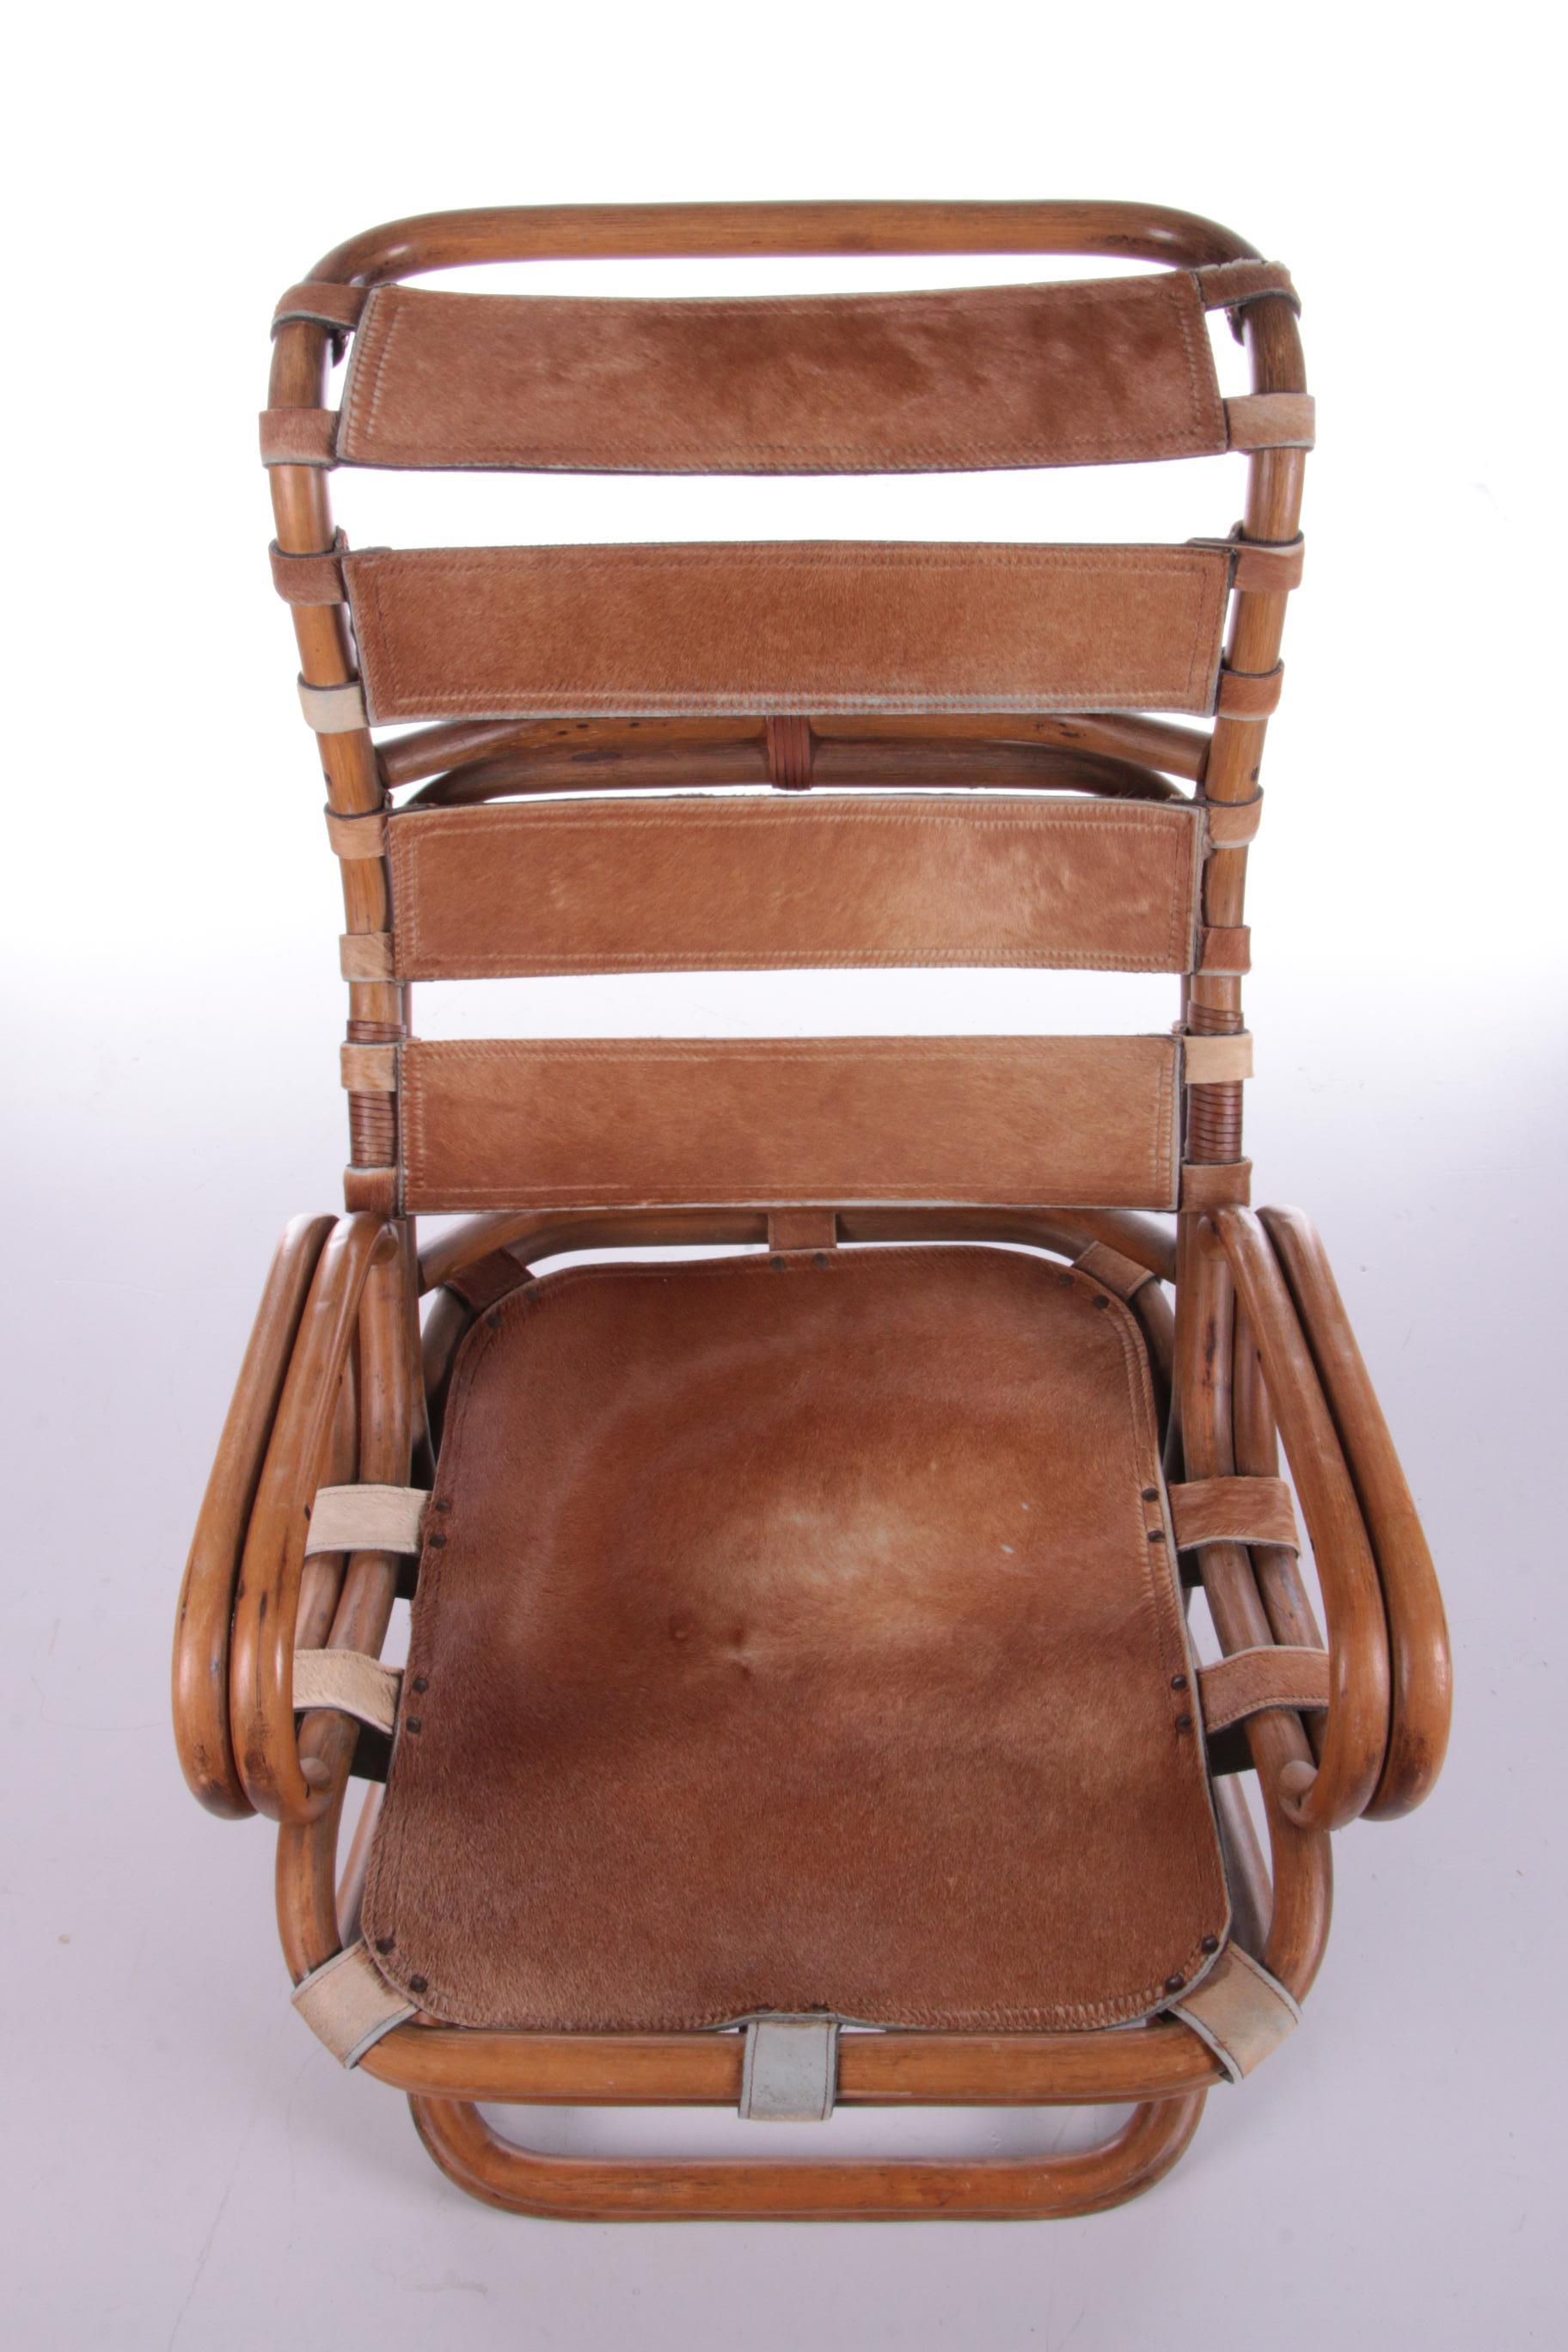 Tito Agnoli Relax Chair Made of Bamboo and Leather, 1960 For Sale 10